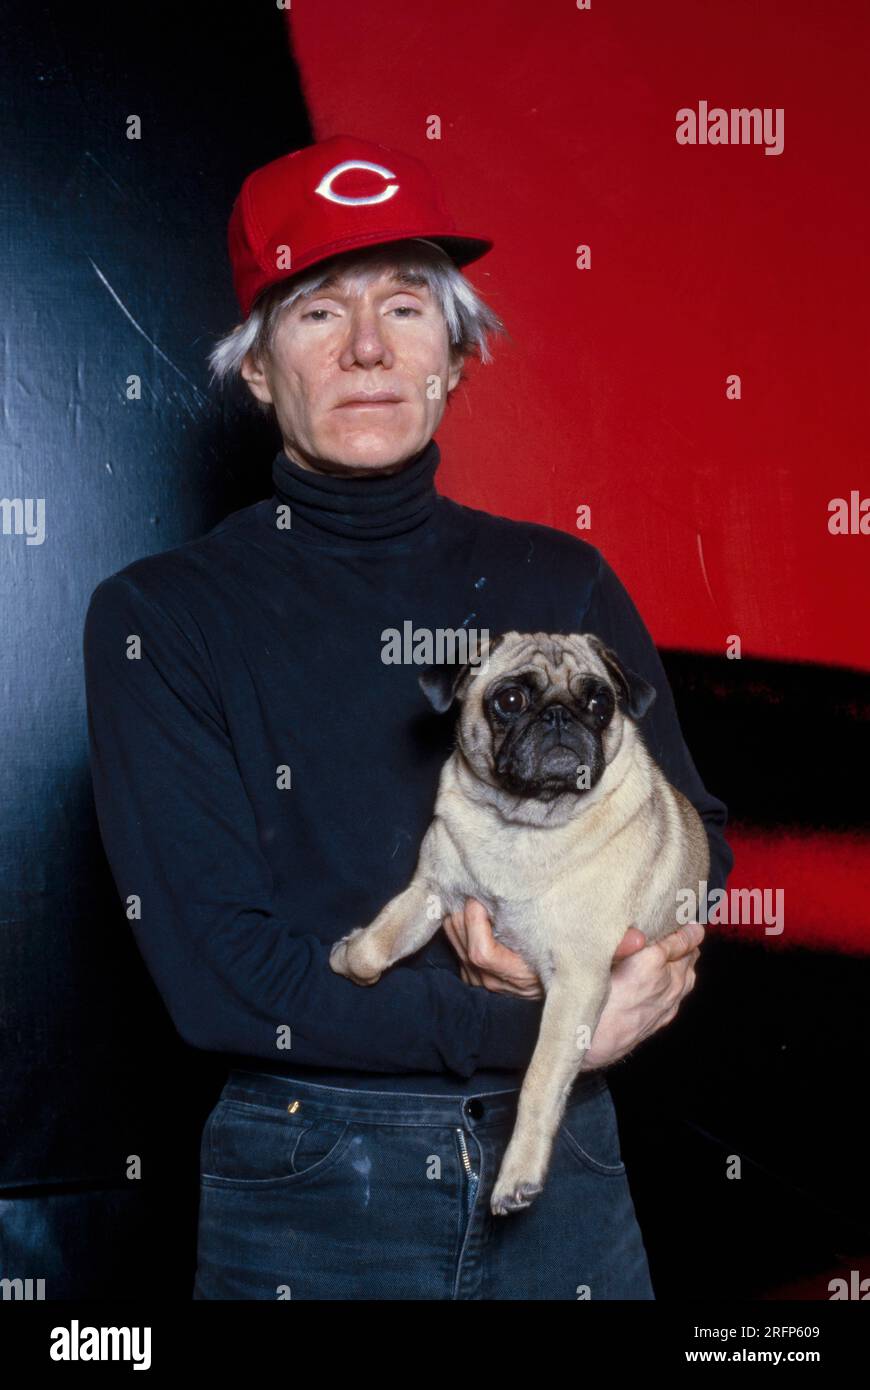 Andy Warhol poses wearing Cincinnati Reds baseball cap while holding pug breed dog in 1982. Warhol was an American visual artist, film director, producer, and leading figure in the pop art movement. His works explore the relationship between artistic expression, advertising, and celebrity culture that flourished by the 1960s, and span a variety of media, including painting, silkscreening, photography, film, and sculpture. Some of his best-known works include the silkscreen paintings Campbell's Soup Cans  and Marilyn Diptych. Photo by Bernard Gotfryd Stock Photo